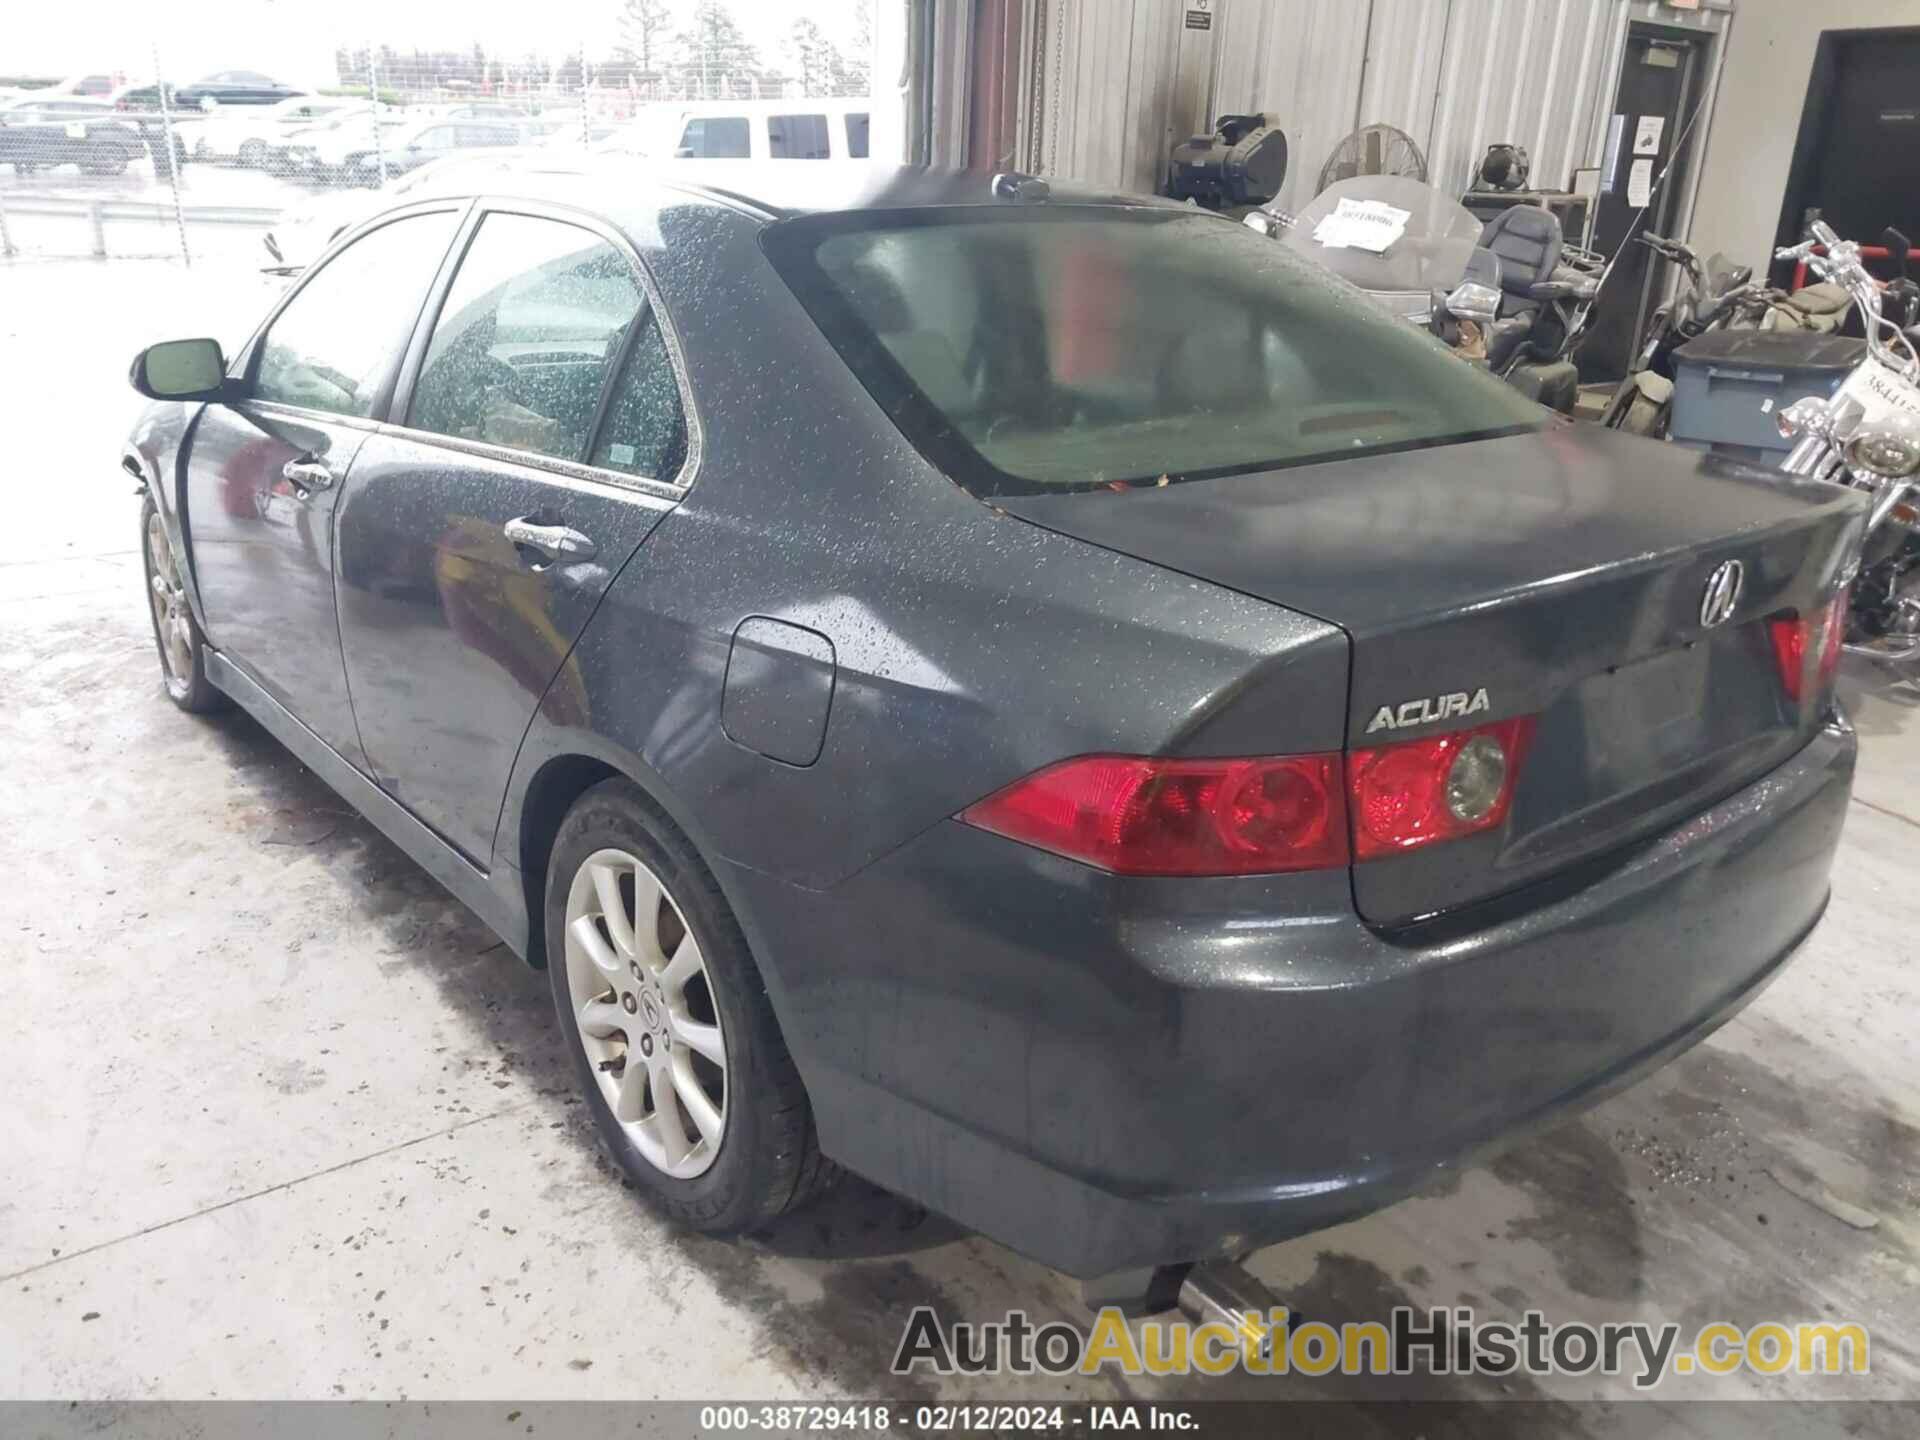 ACURA TSX, JH4CL96898C000609